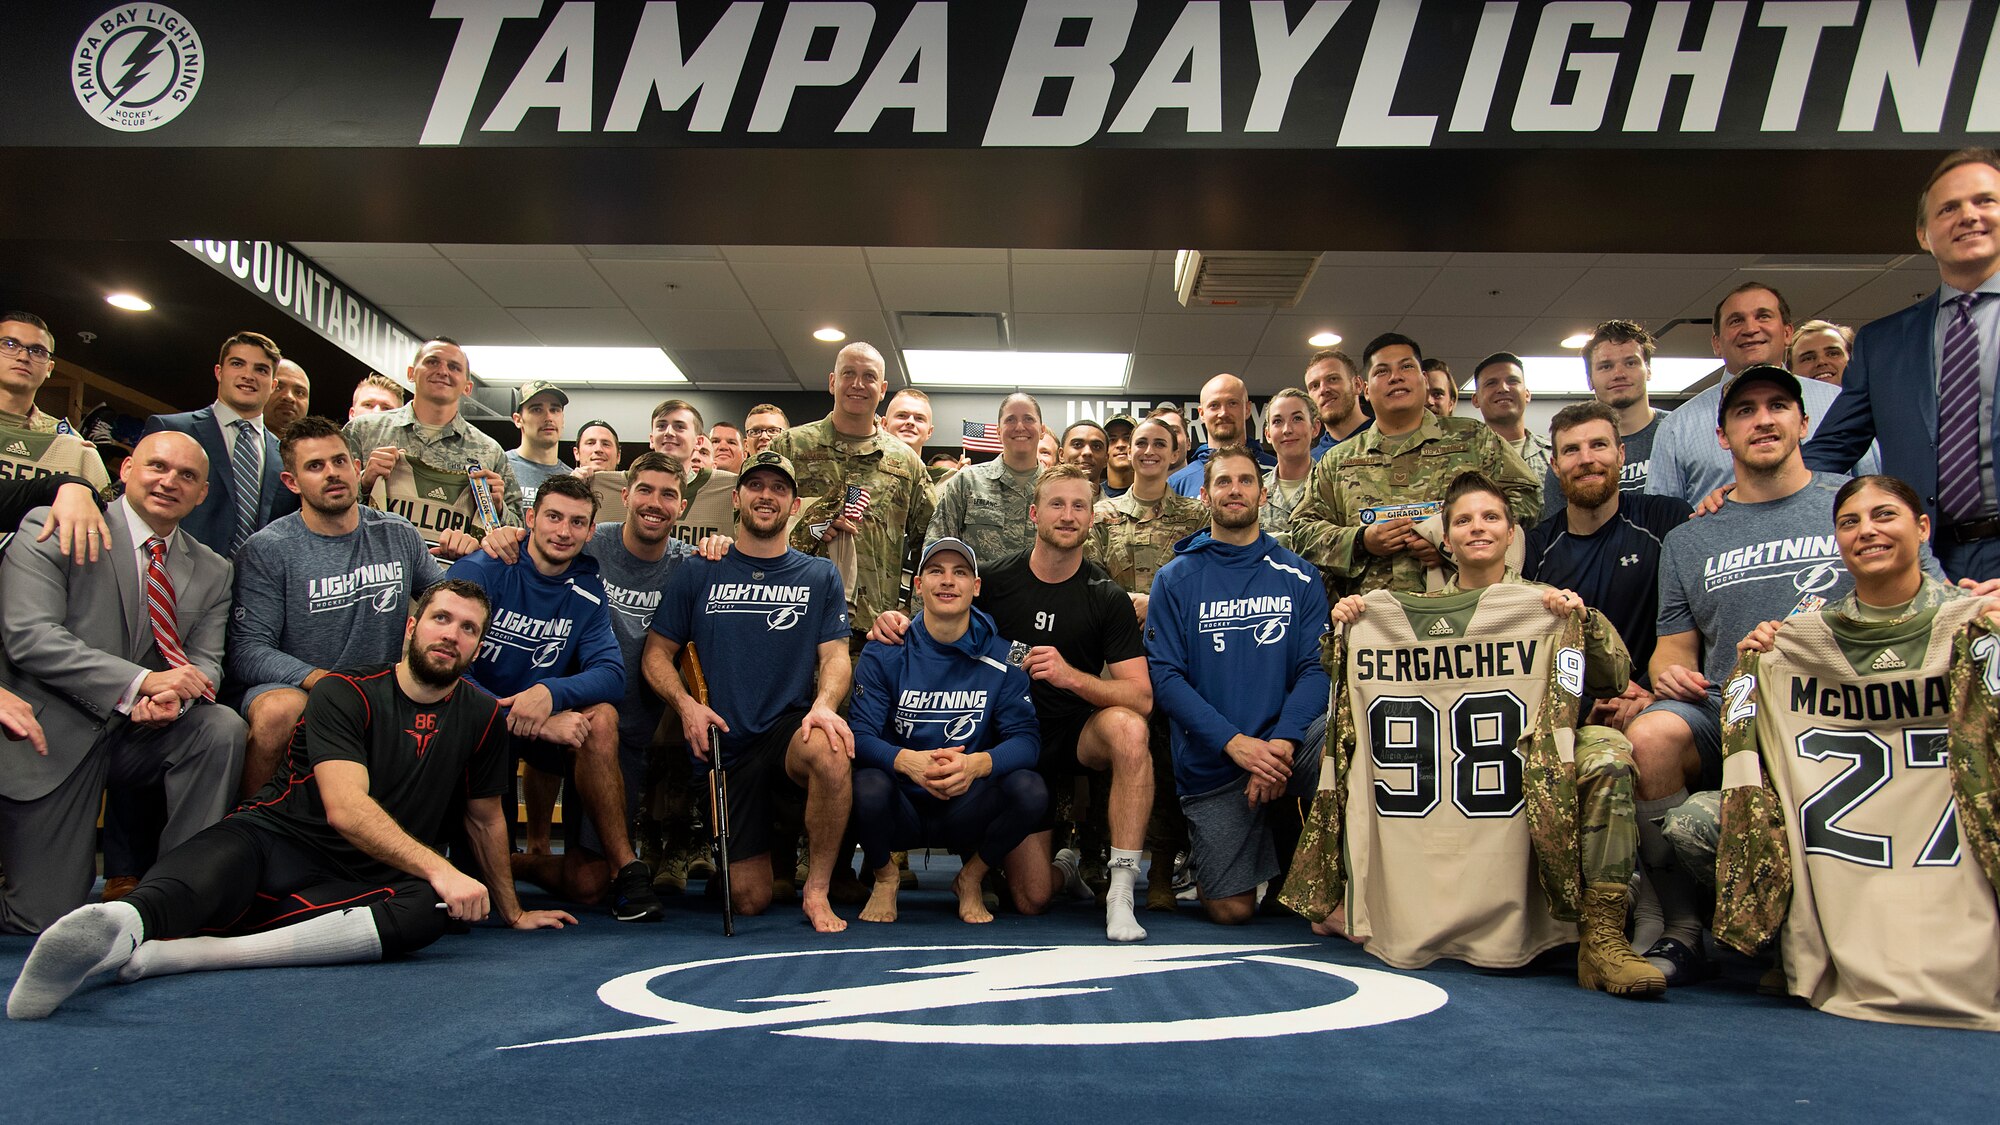 U.S. Air Force Airmen from MacDill Air Force Base, Fla., take part in the Tampa Bay Lightning’s Military Appreciation Night game at Amalie Arena Nov. 8, 2018. Throughout the night, the Lightning honored current and retired military members as well as the more than 2,000 service members in attendance.